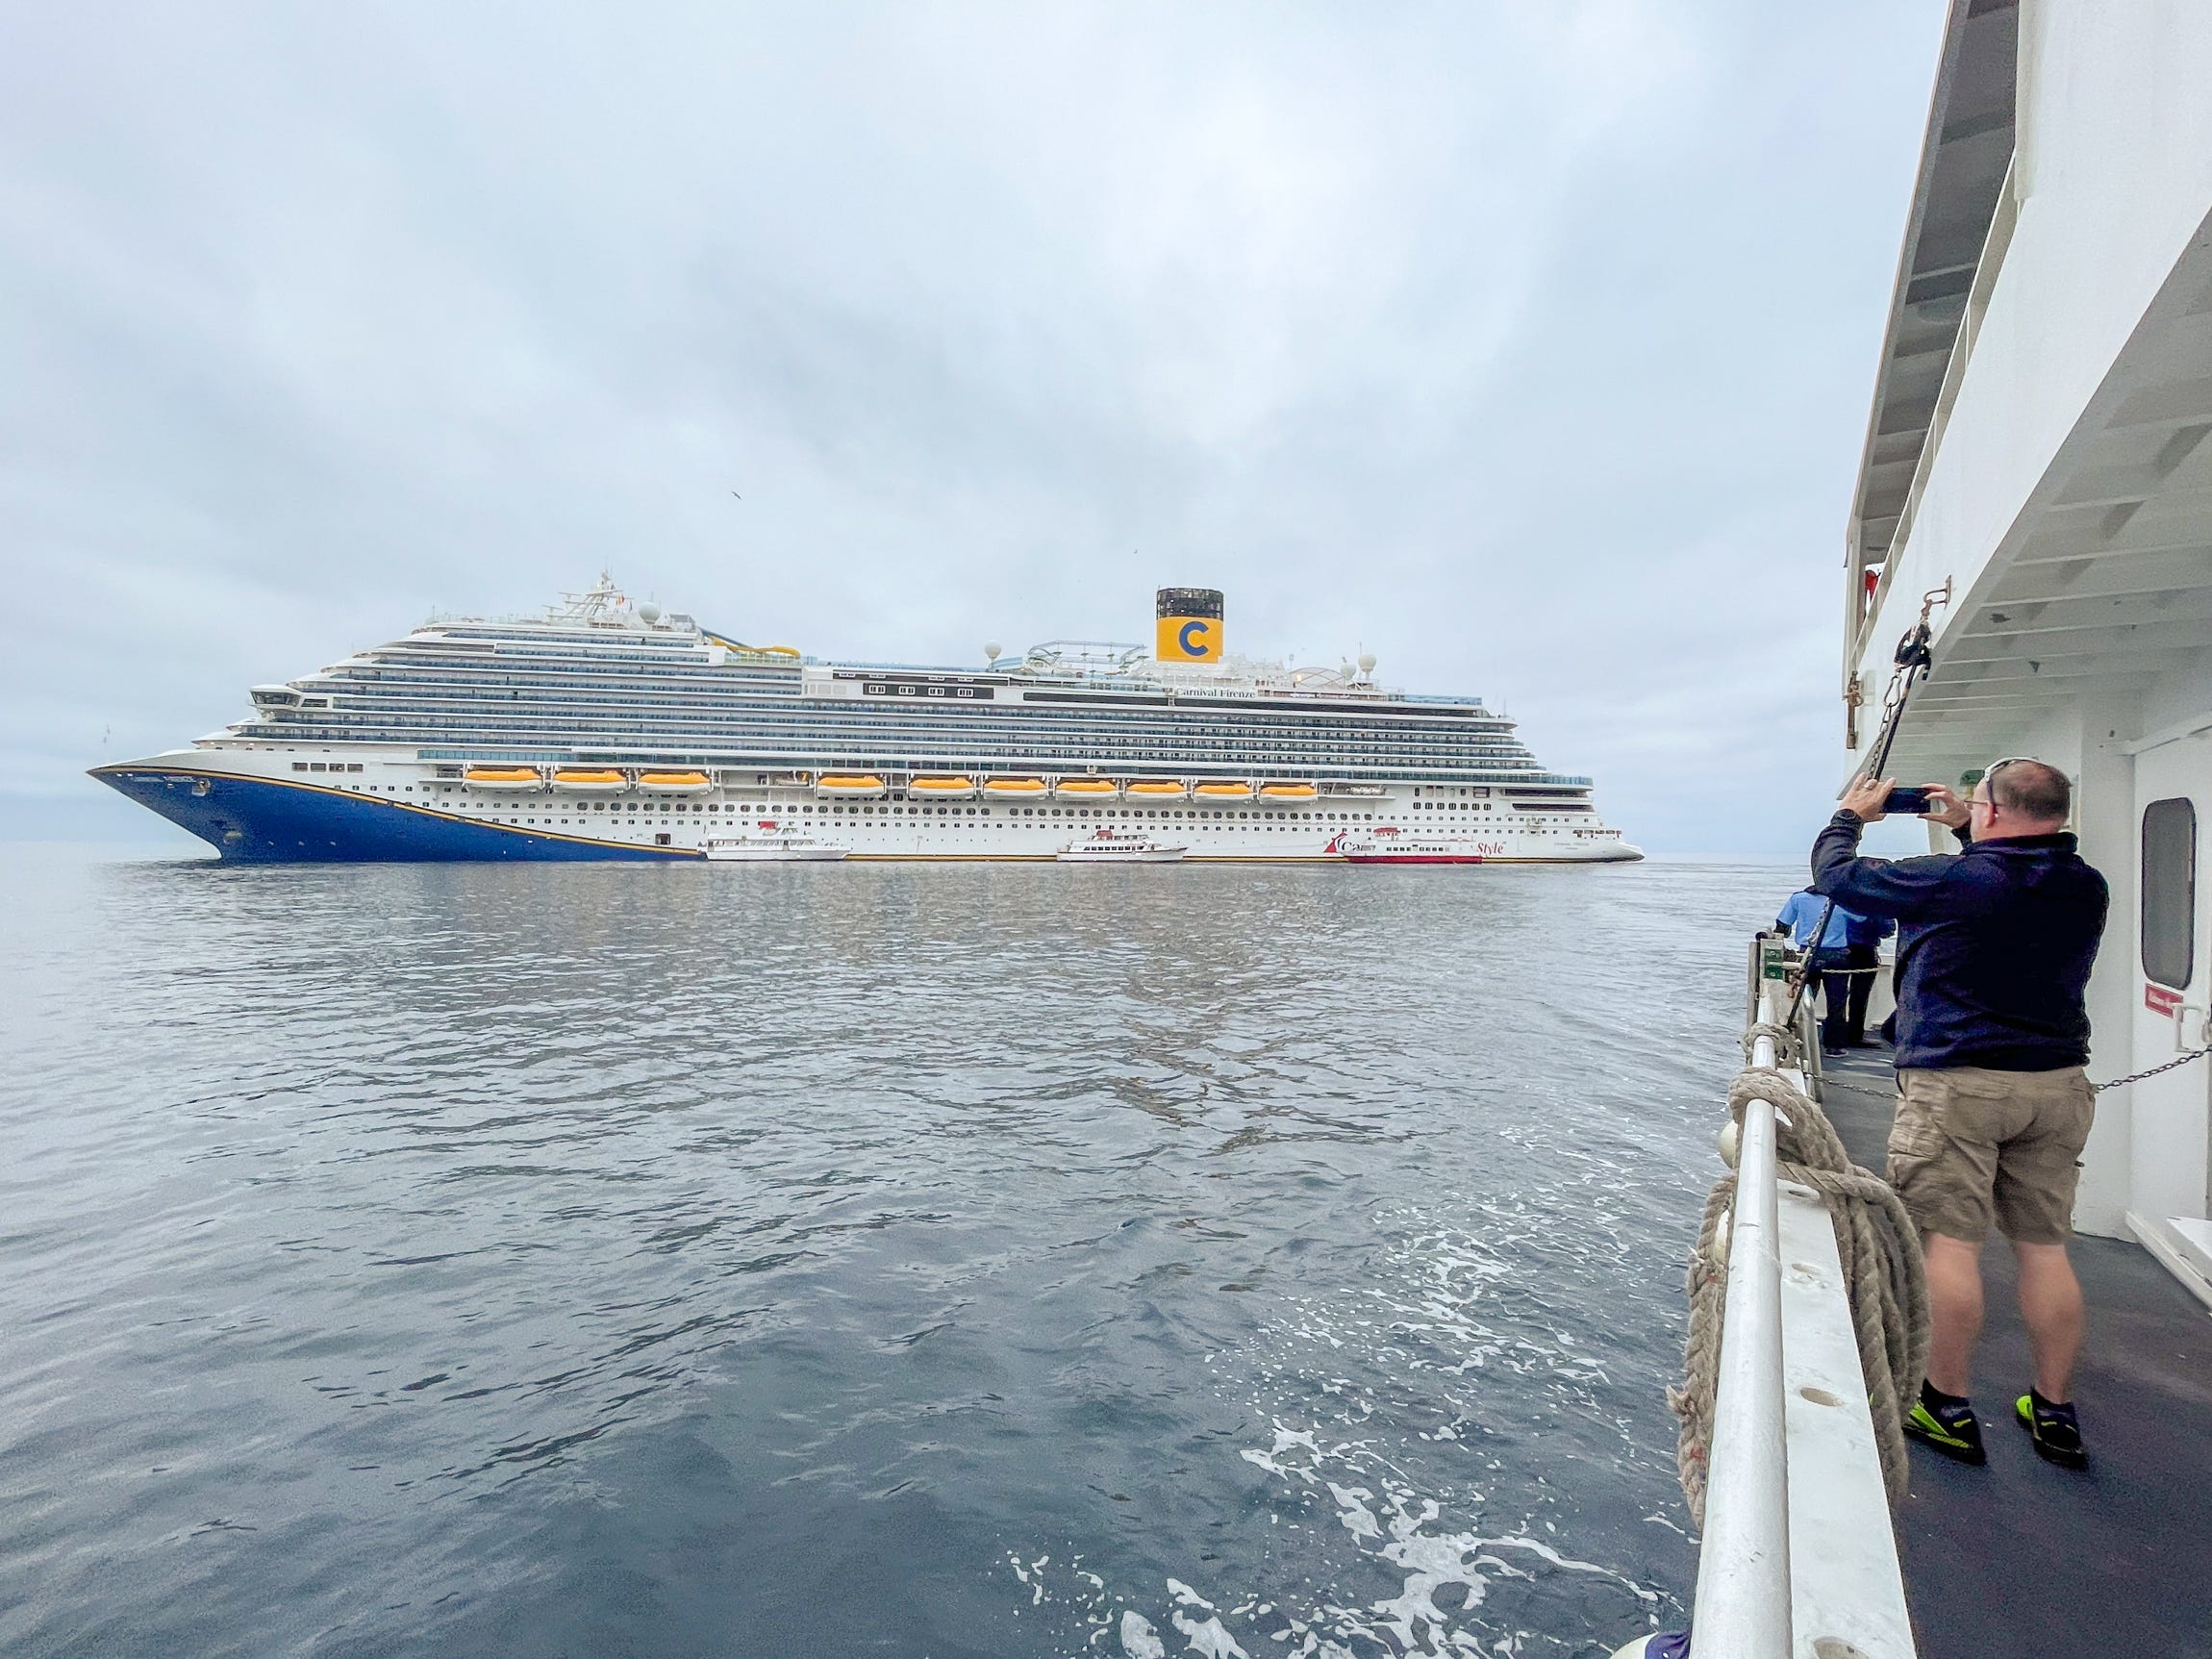 <p>I paid $735 for a solo interior cabin, including optional gratuities.</p><p>If that sounds relatively expensive, you'd be right. Carnival Firenze is the company's latest vessel, and <a href="https://www.businessinsider.com/royal-caribbean-icon-of-the-seas-trip-price-expensive-2023-11">newer cruise ships</a> generally command a pricing premium.</p><p>It's also worth noting that I had booked it less than 10 days before embarkation. Oops.</p>